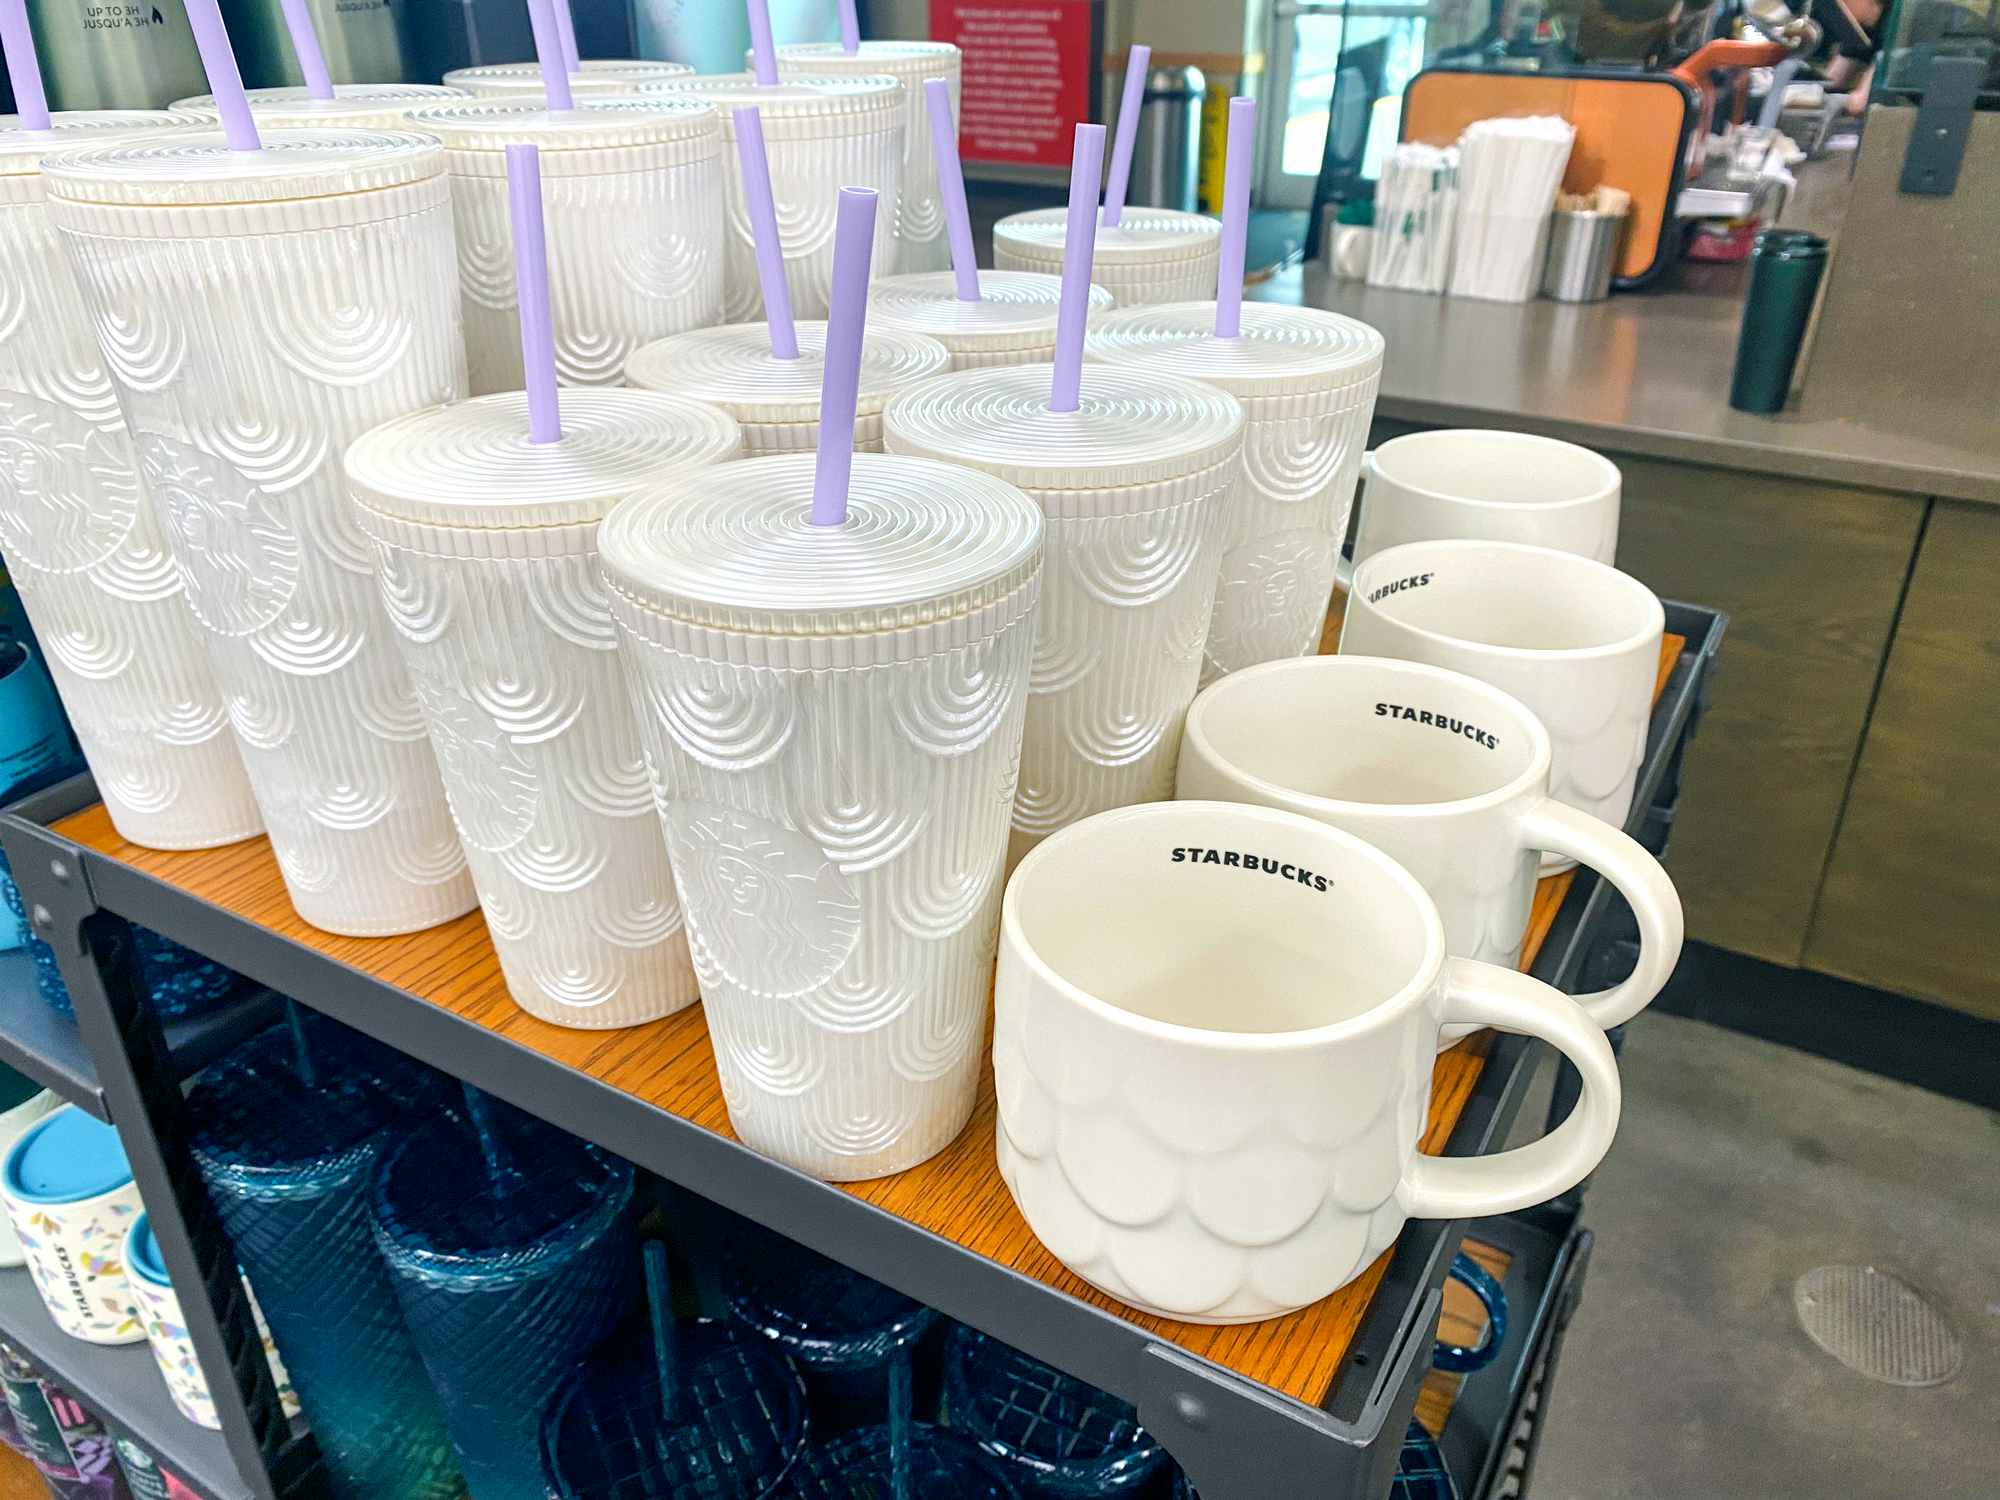 https://prod-cdn-thekrazycouponlady.imgix.net/wp-content/uploads/2023/02/0323-starbucks-spring-cups-white-pearl-tumblers-mugs-1679667678-1679667679.jpg?auto=format&fit=fill&q=25